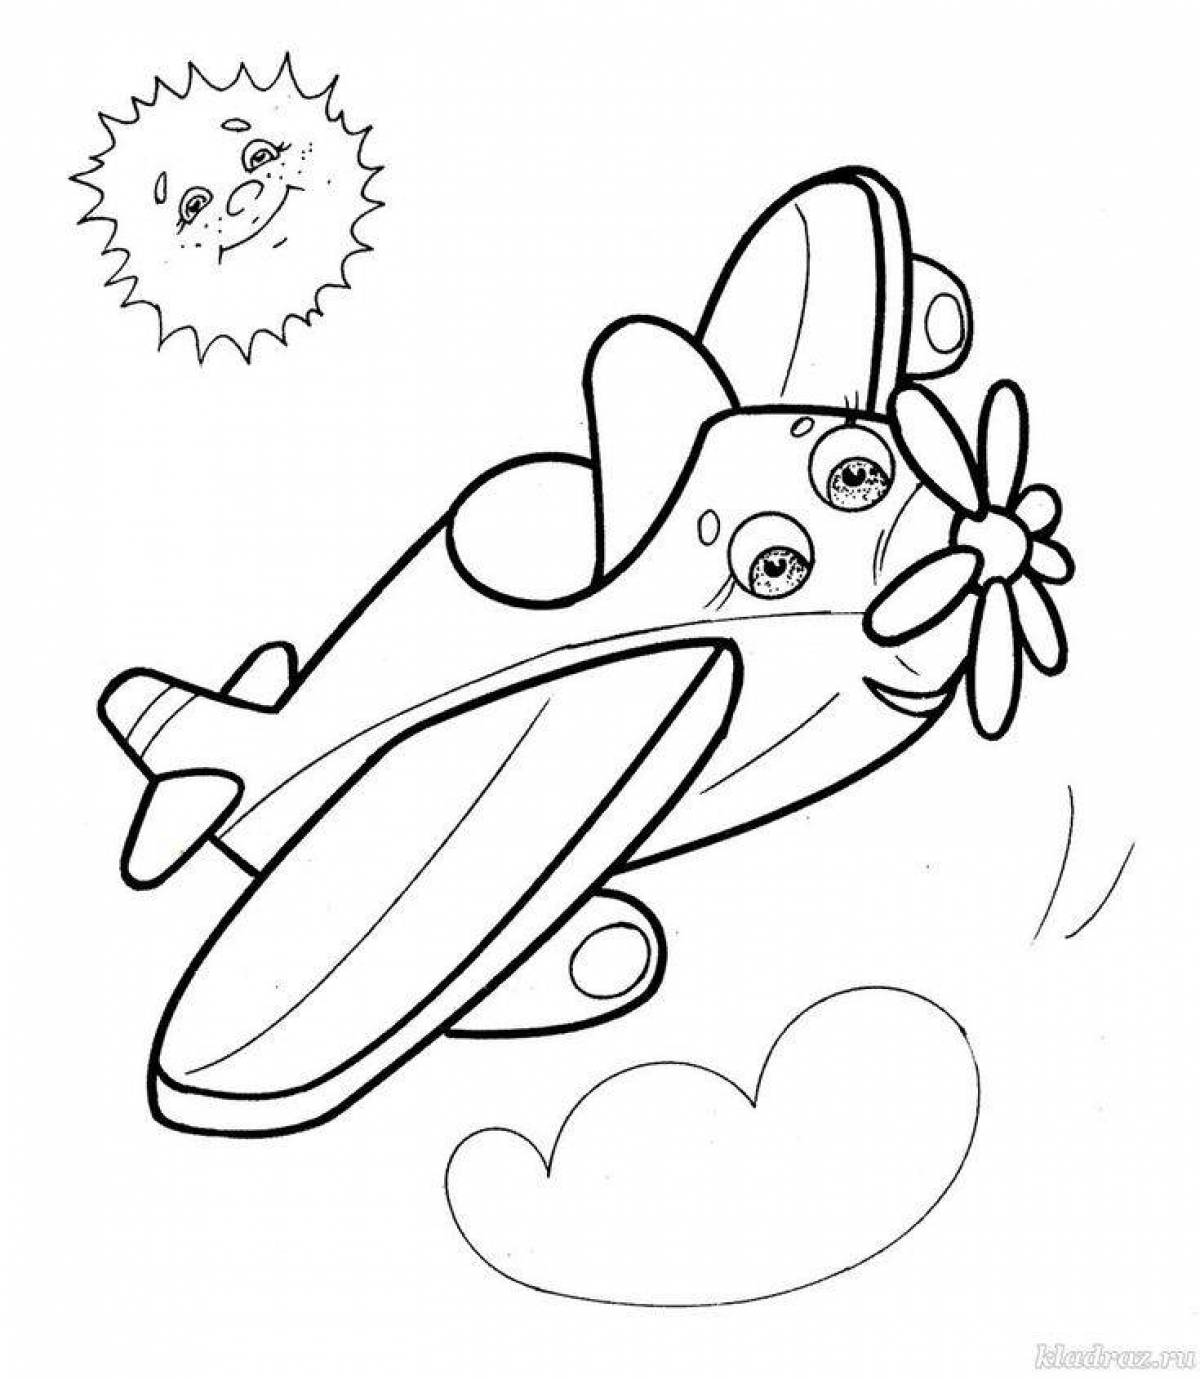 A fun airplane coloring book for 3-4 year olds